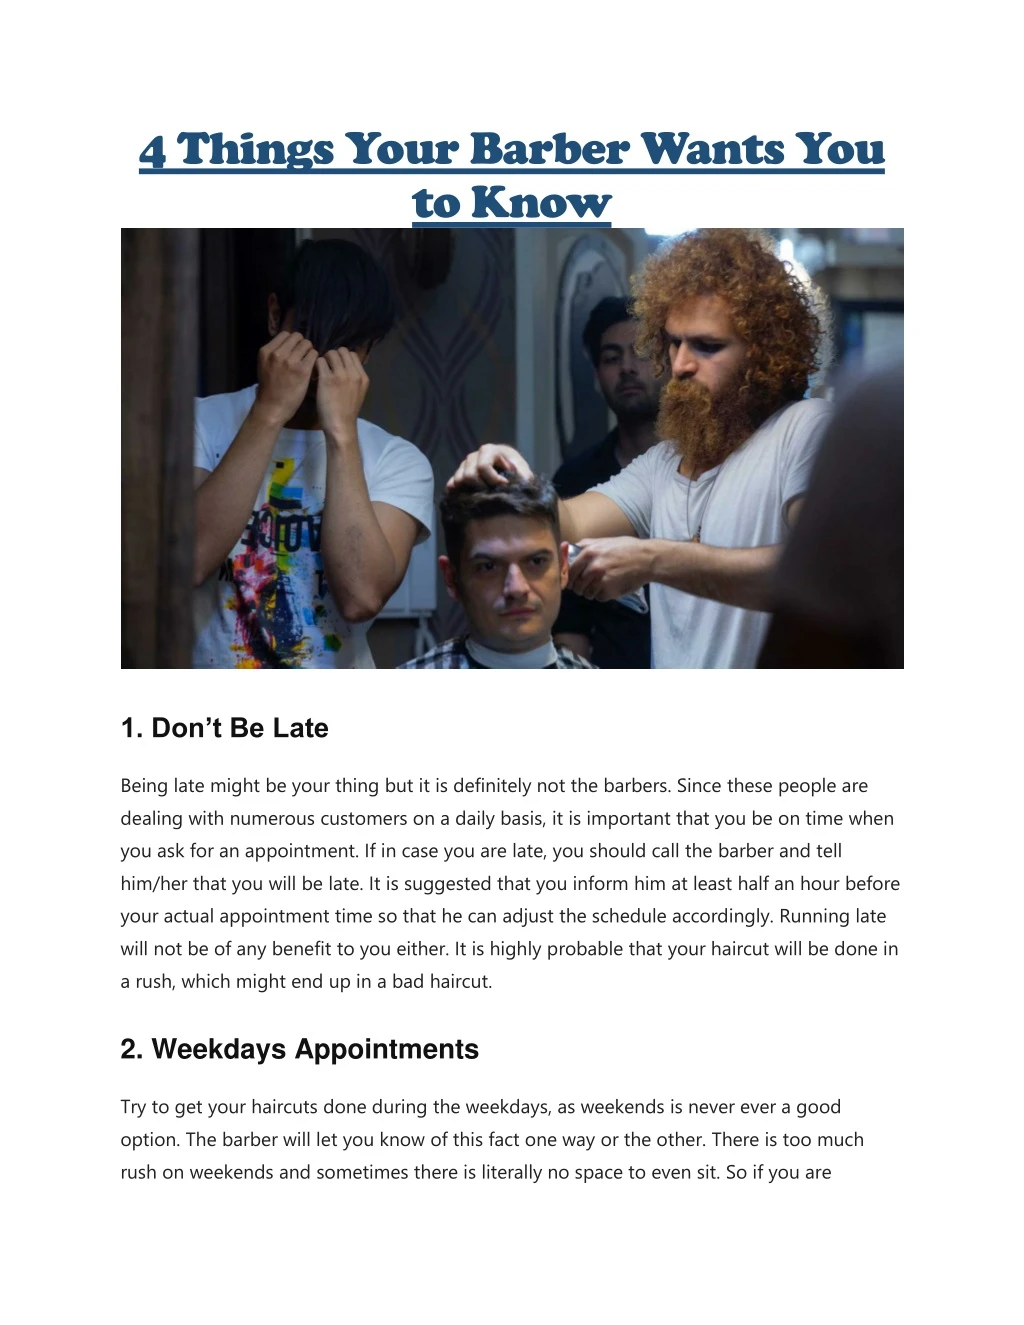 4 things your barber wants you to know